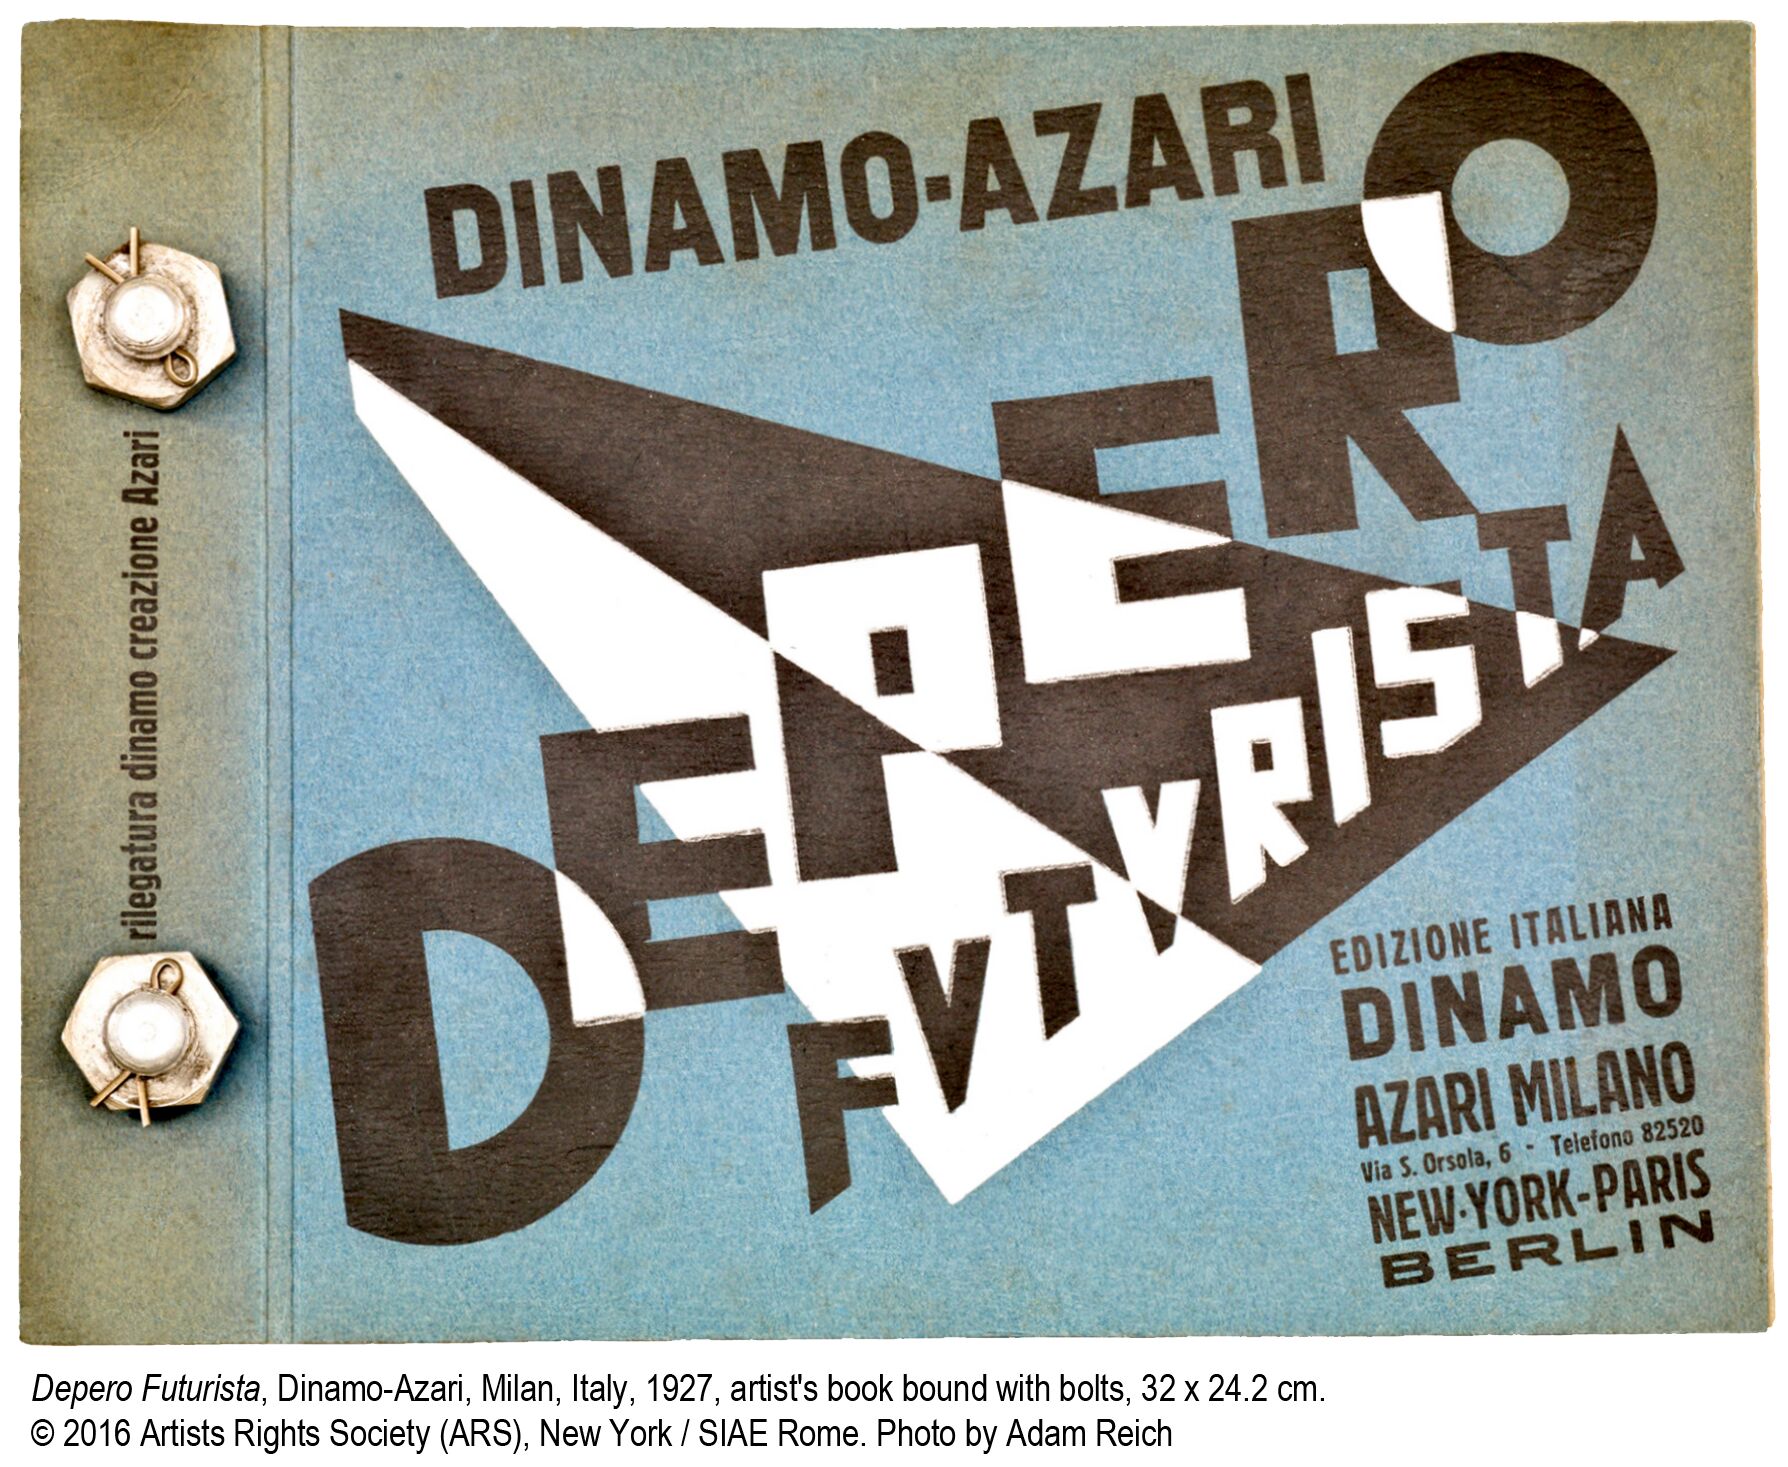 Have you heard the news about Depero’s Bolted Book?